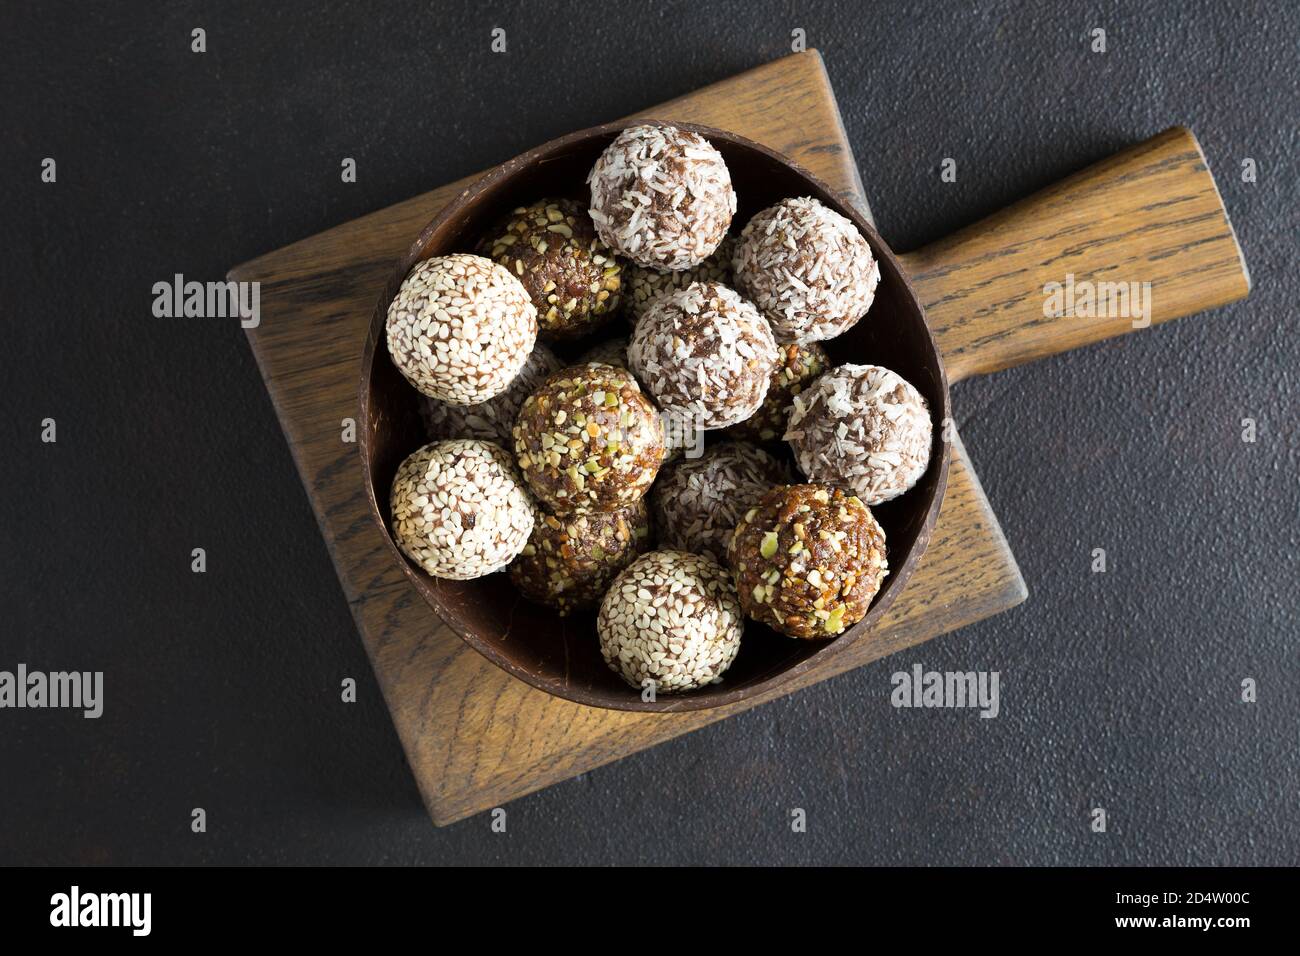 Raw vegetarian energy balls with cashews, hazelnuts and in the wooden bowl on board on dark background. Homemade, organic food. Flat lay, close up. Stock Photo